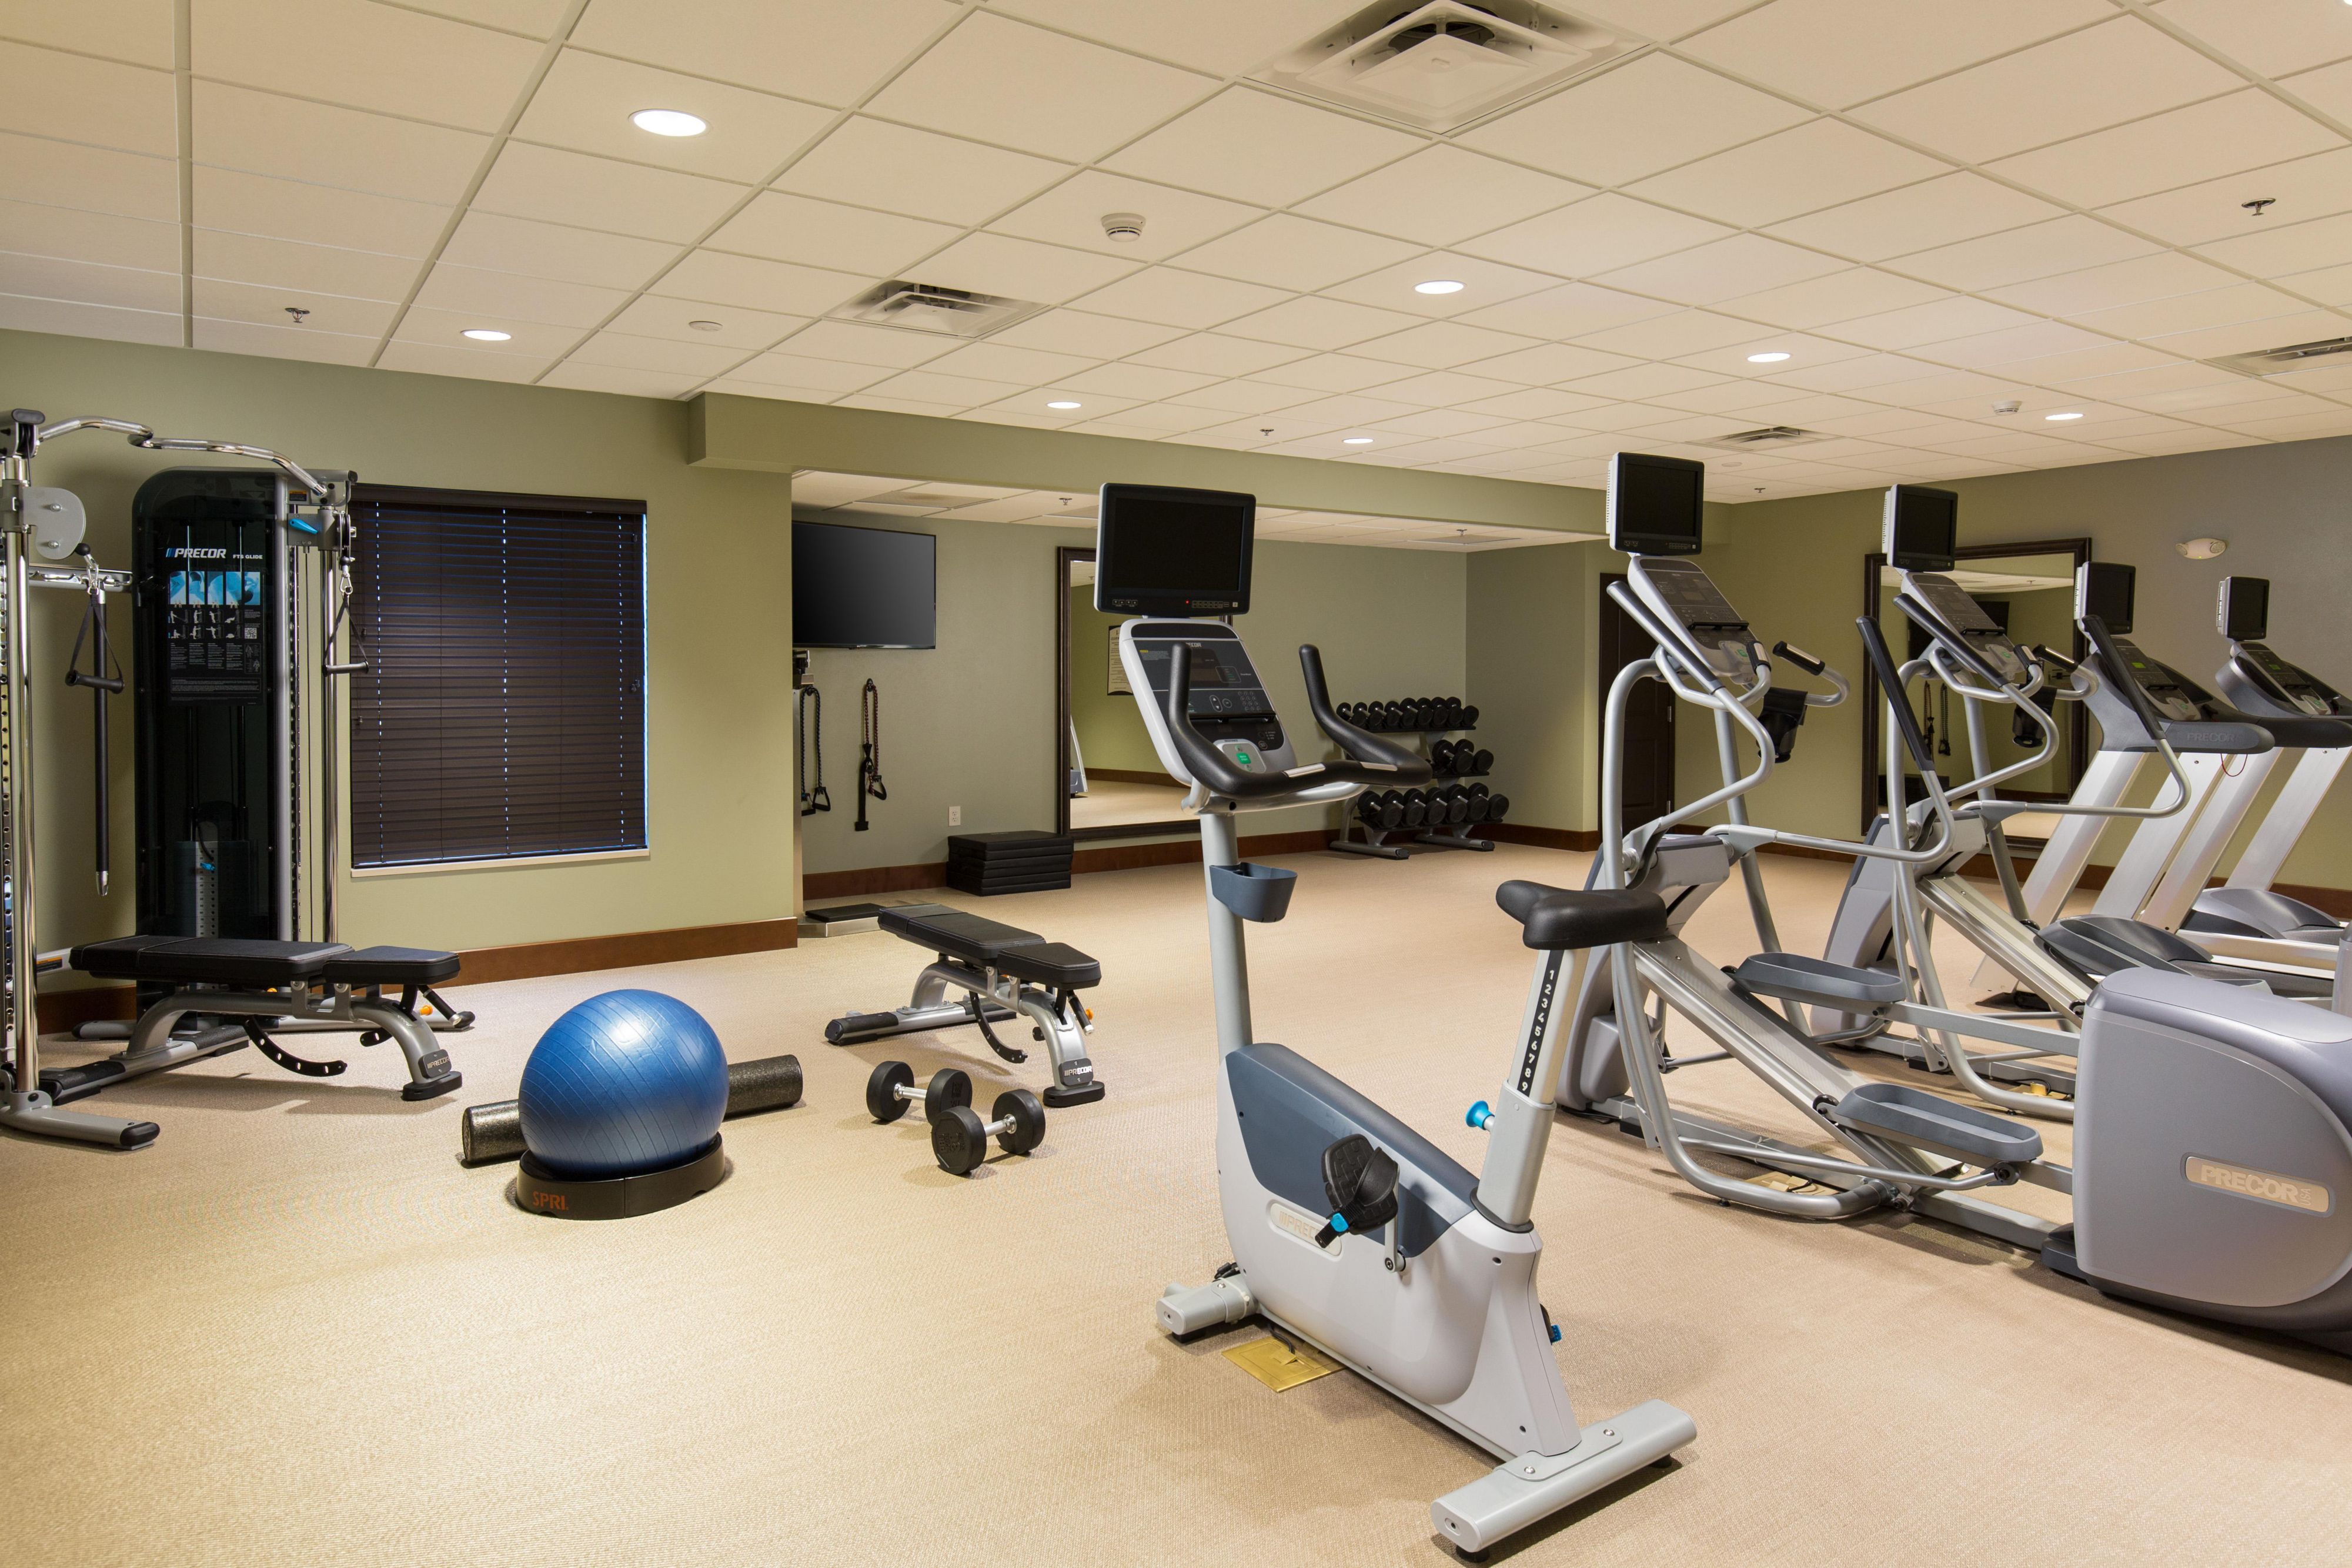 Turbocharge your energy in our modern fitness center with state-of-the-art strength training equipment, yoga balls and cardio machines